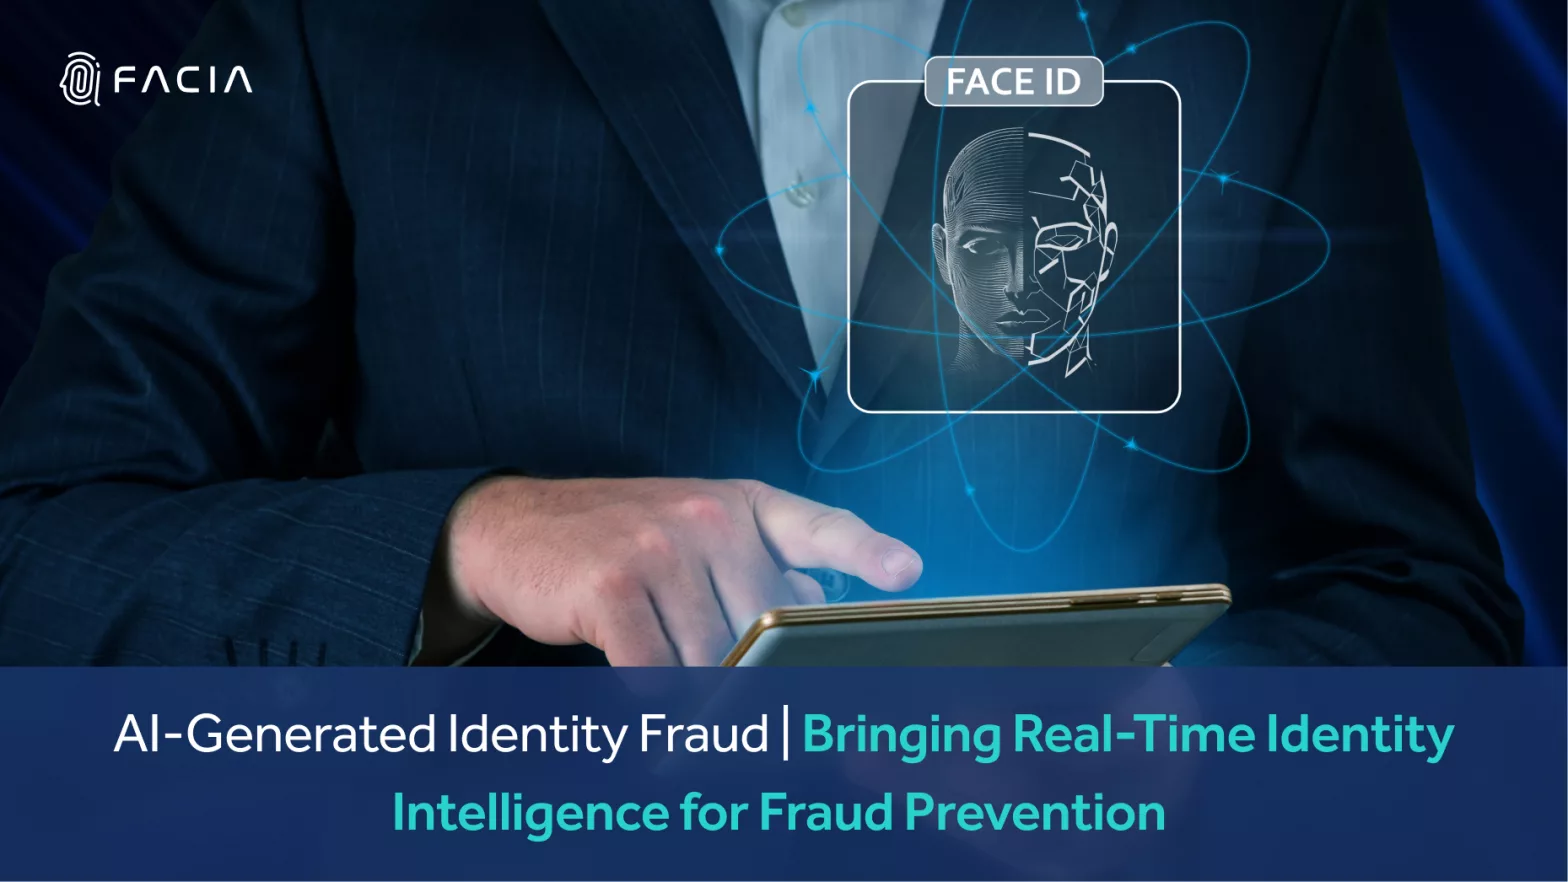 Identity Fraud has advanced with the advent of Generative AI